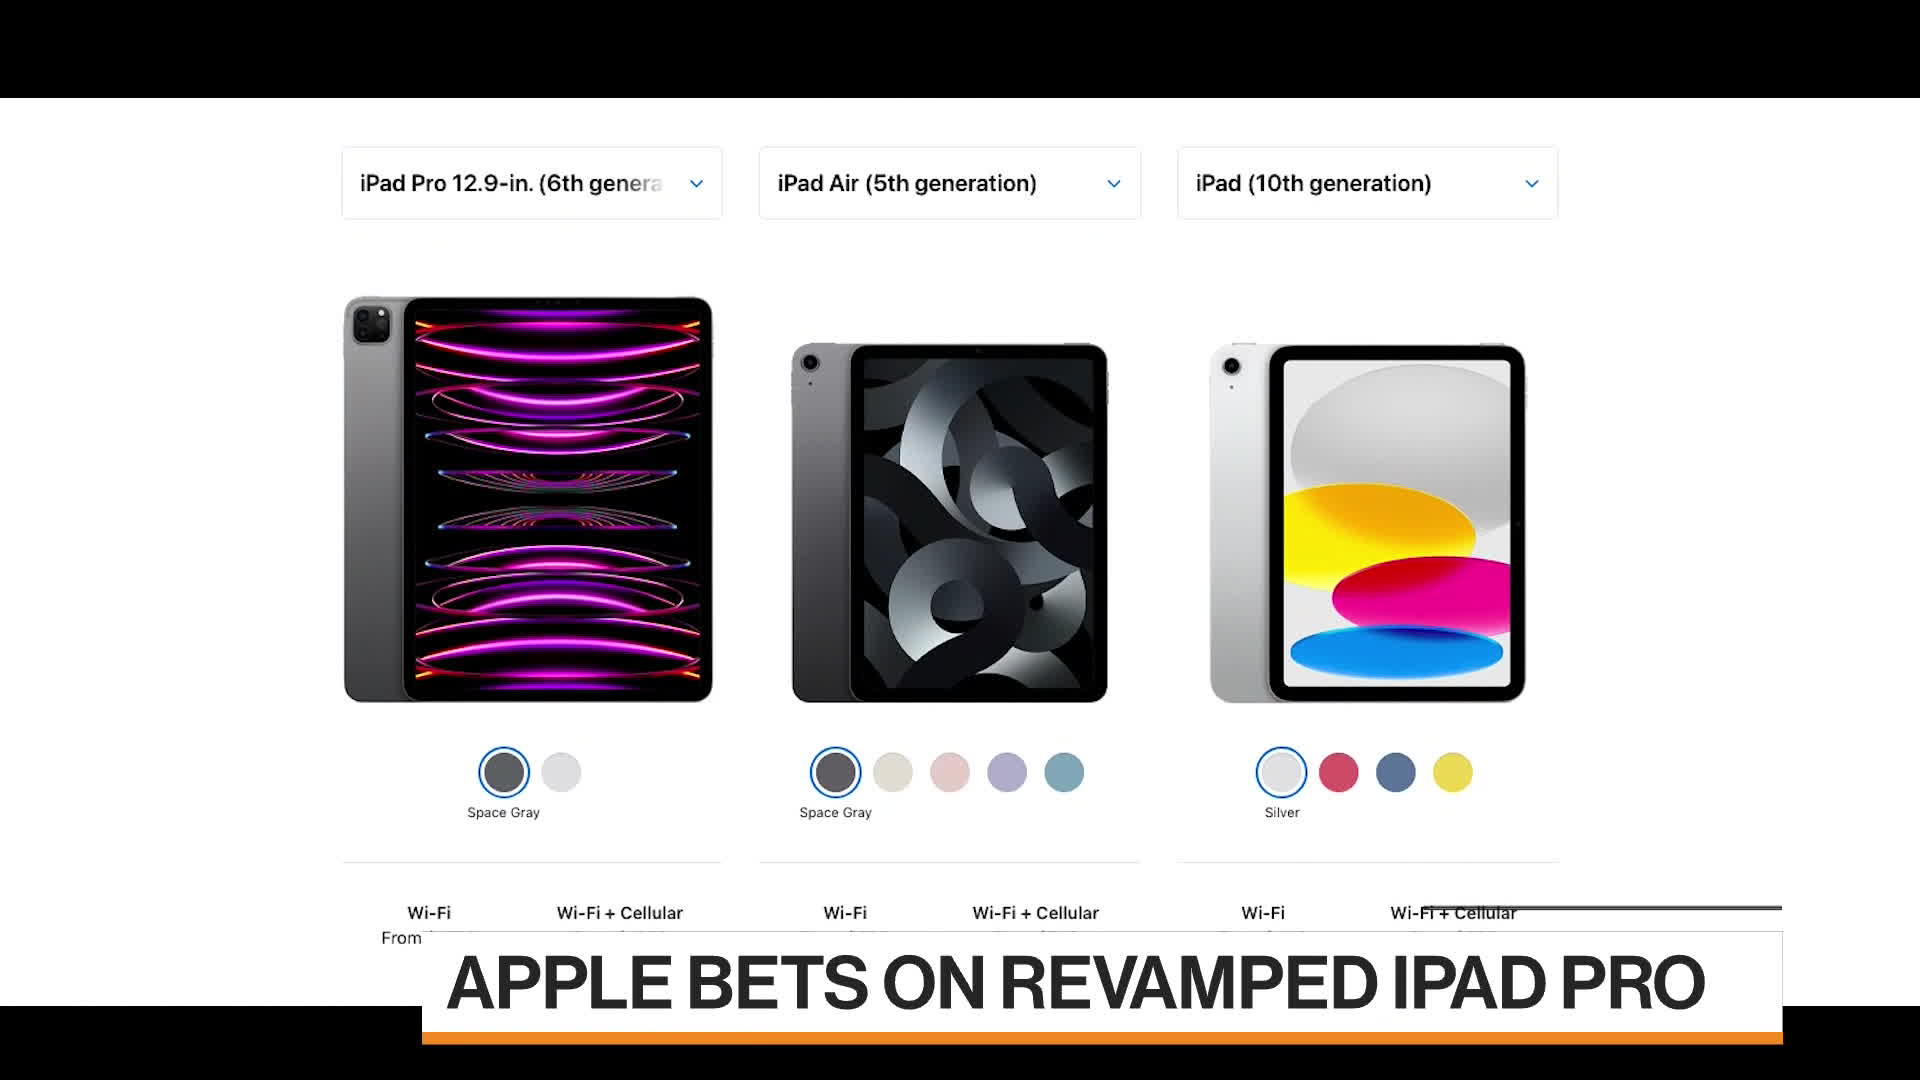 Apple to launch new iPads, M3 MacBook Air to fight weak sales - Bloomberg  News